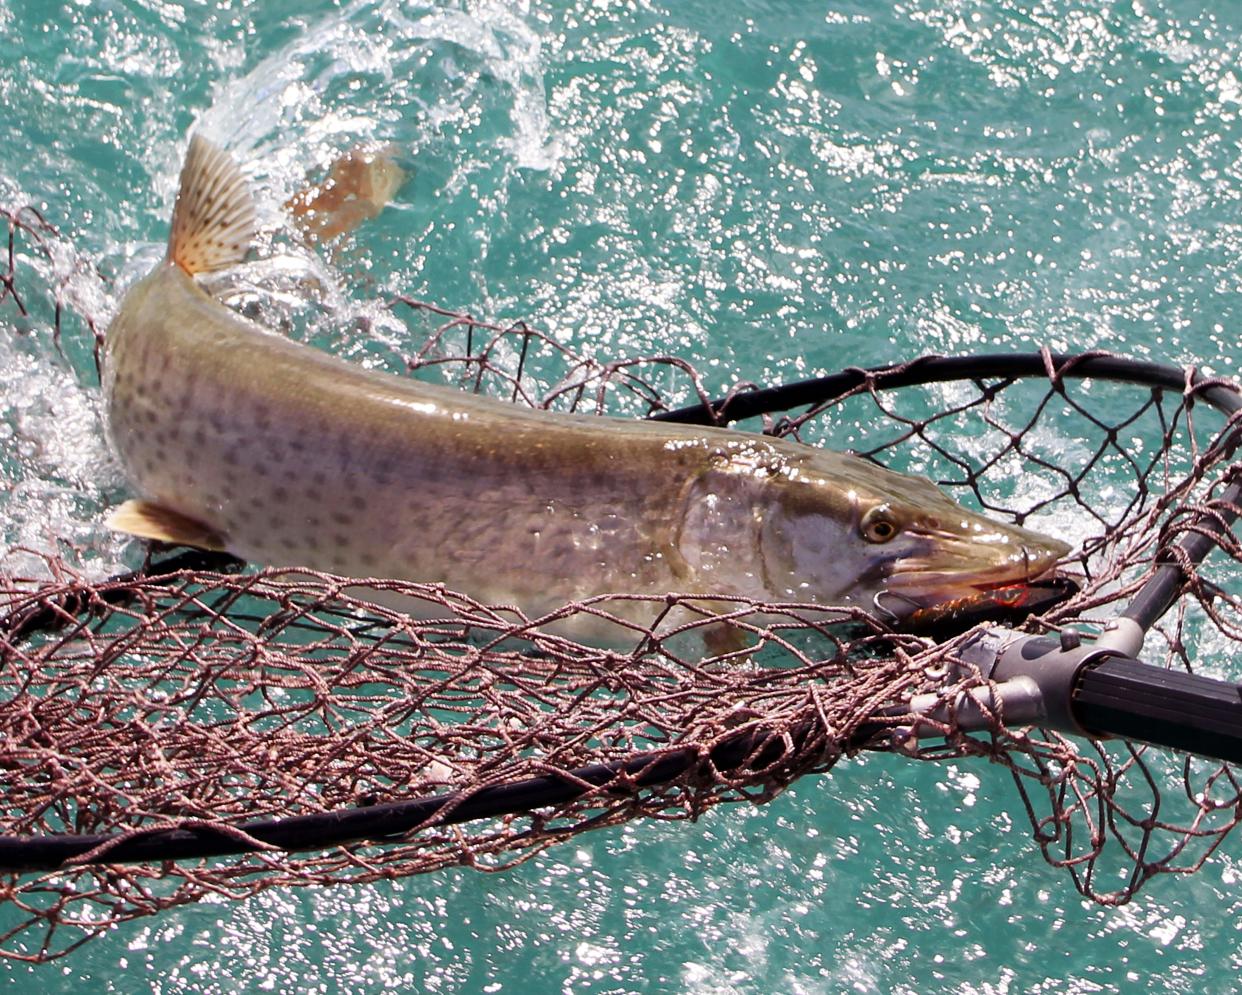 This 35-inch muskellunge was one of ten species of fish landed on the St. Clair River an an afternoon.